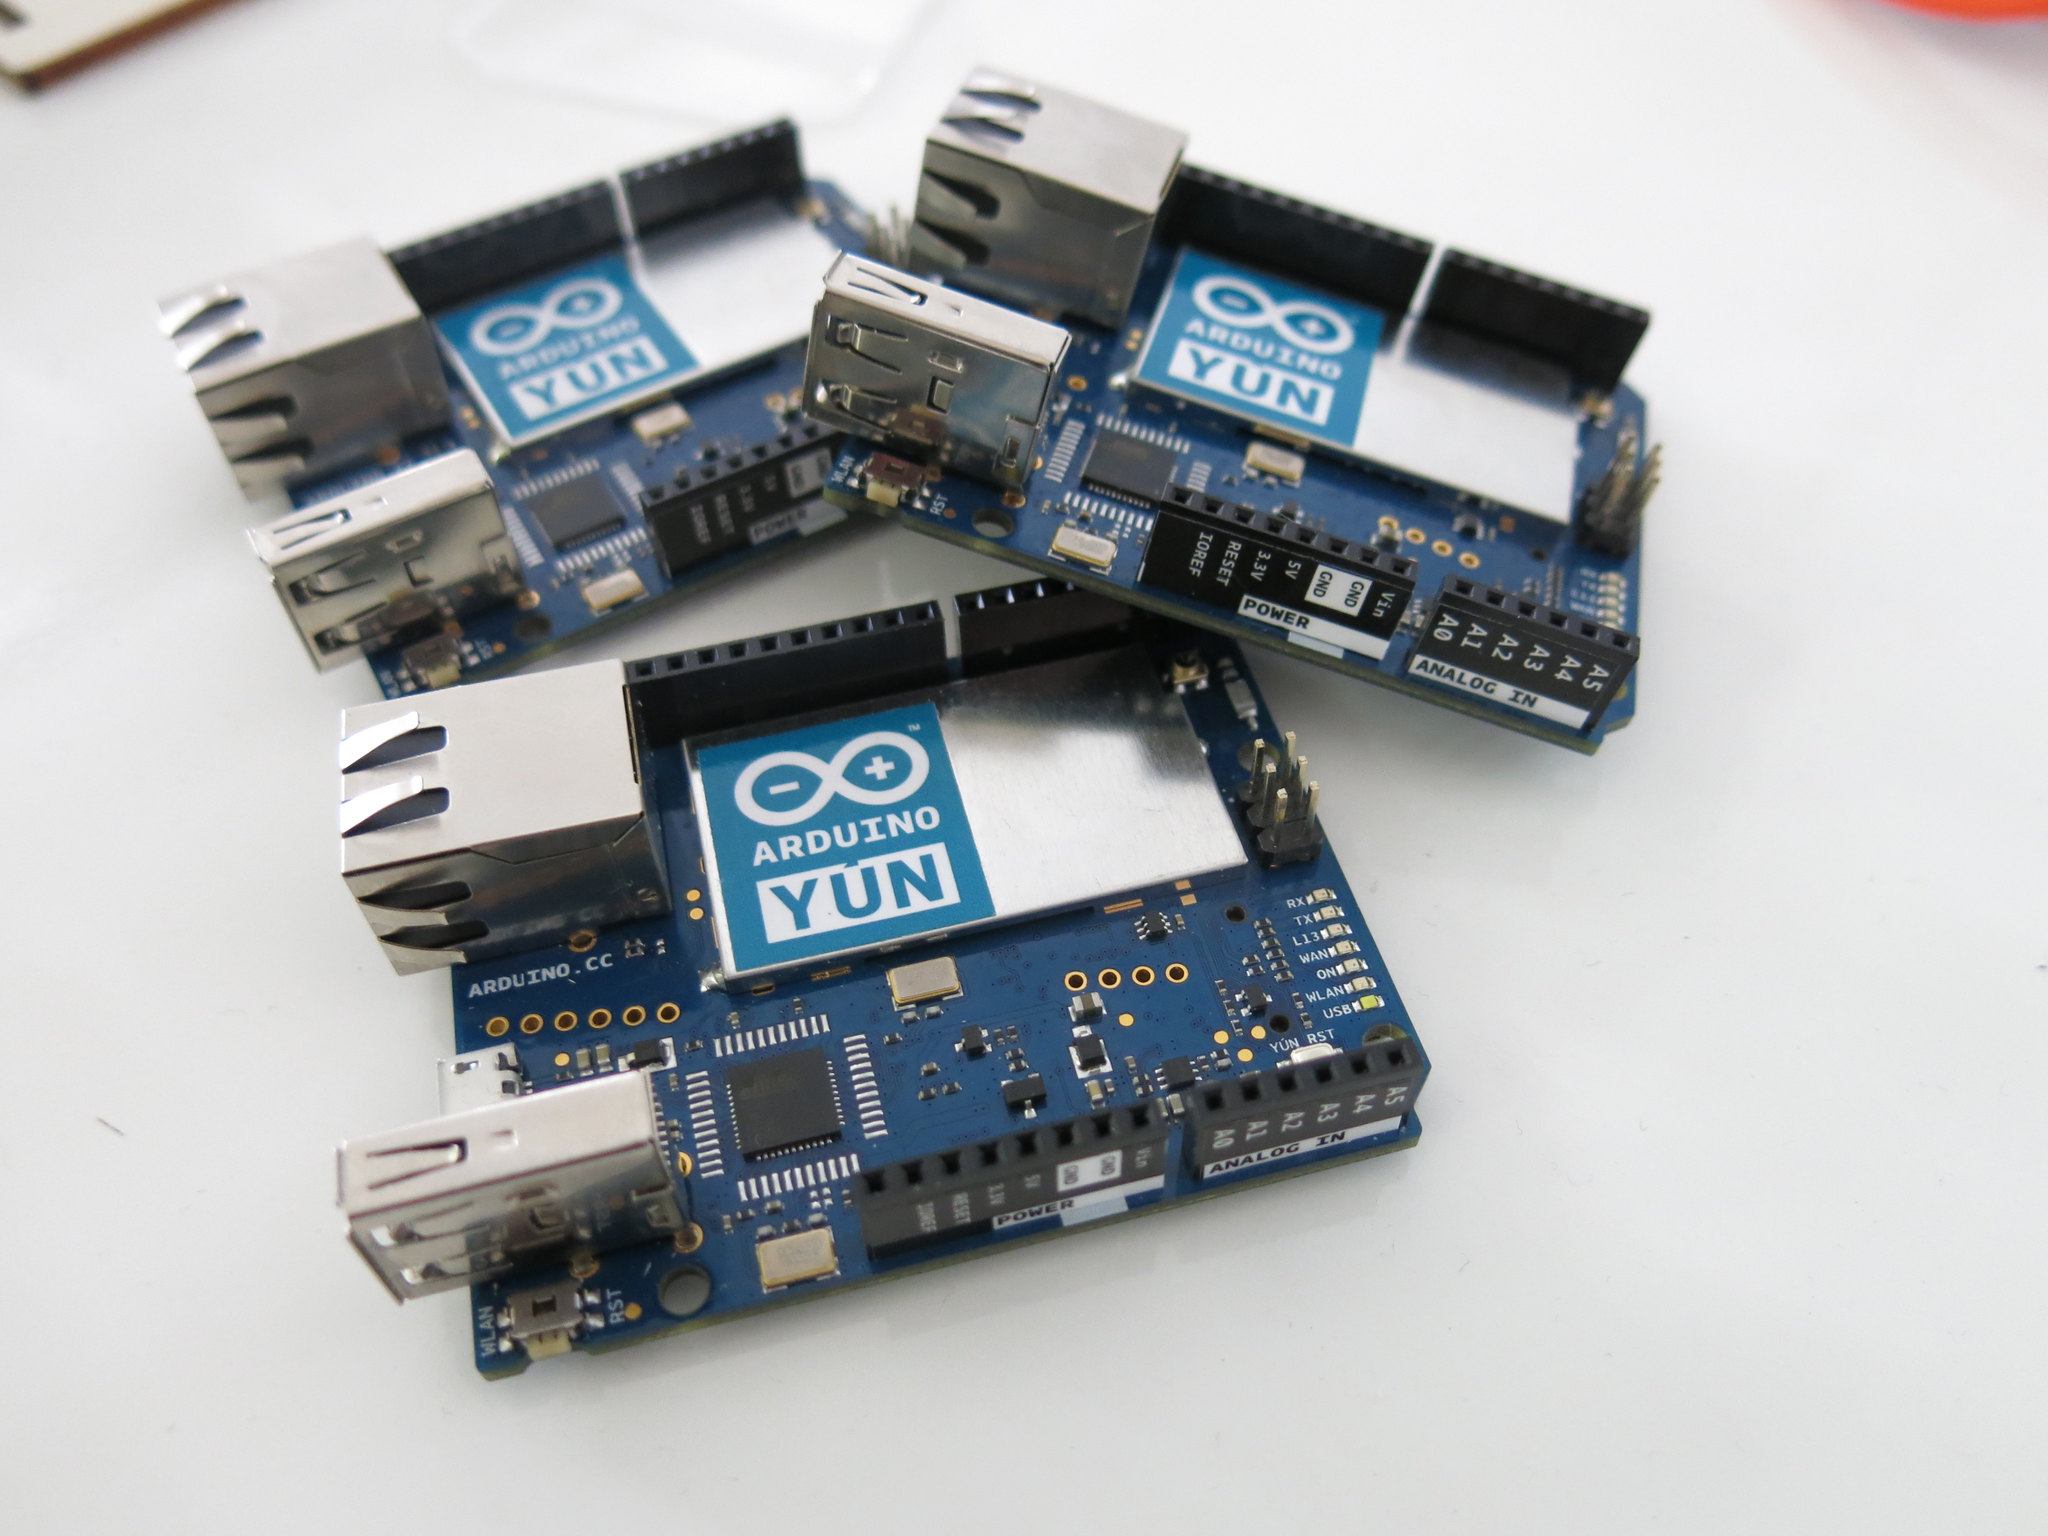 Arduino Internet of Things device hard drives